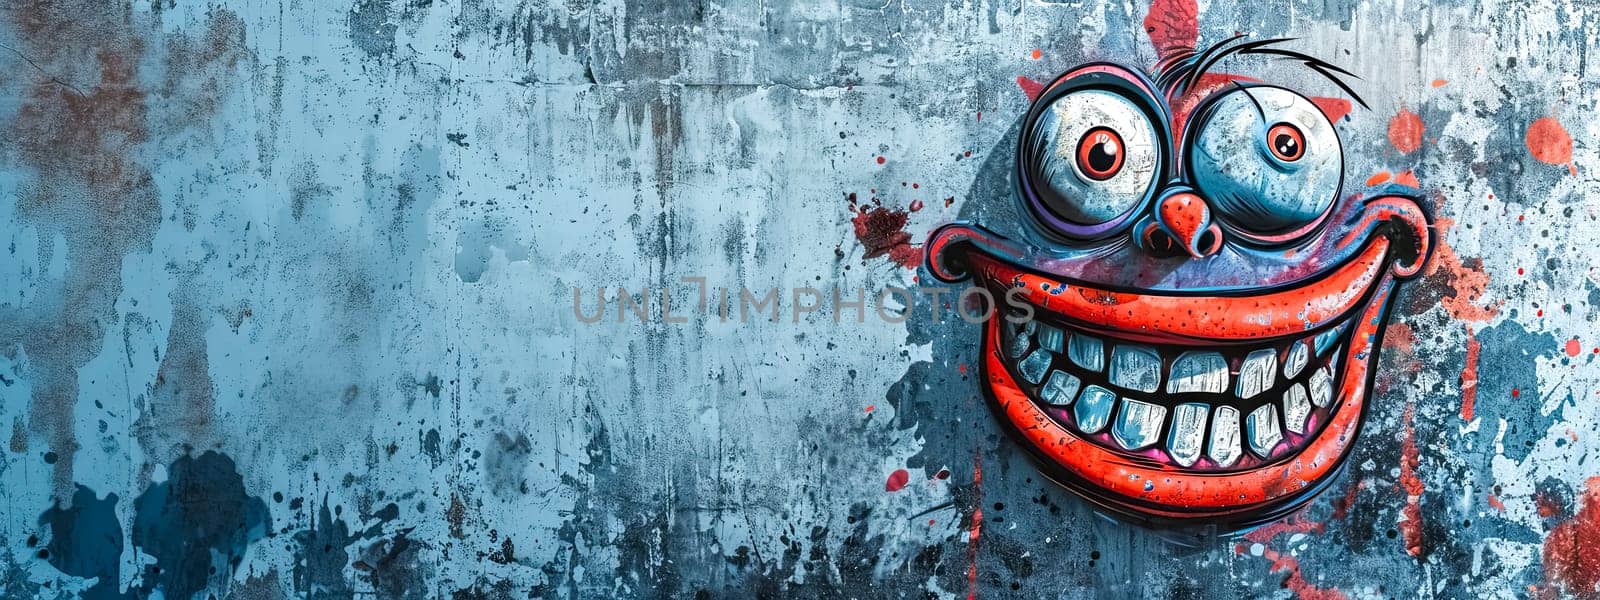 Graffiti of a whimsical smiling face on a grungy wall with paint splatters. by Edophoto